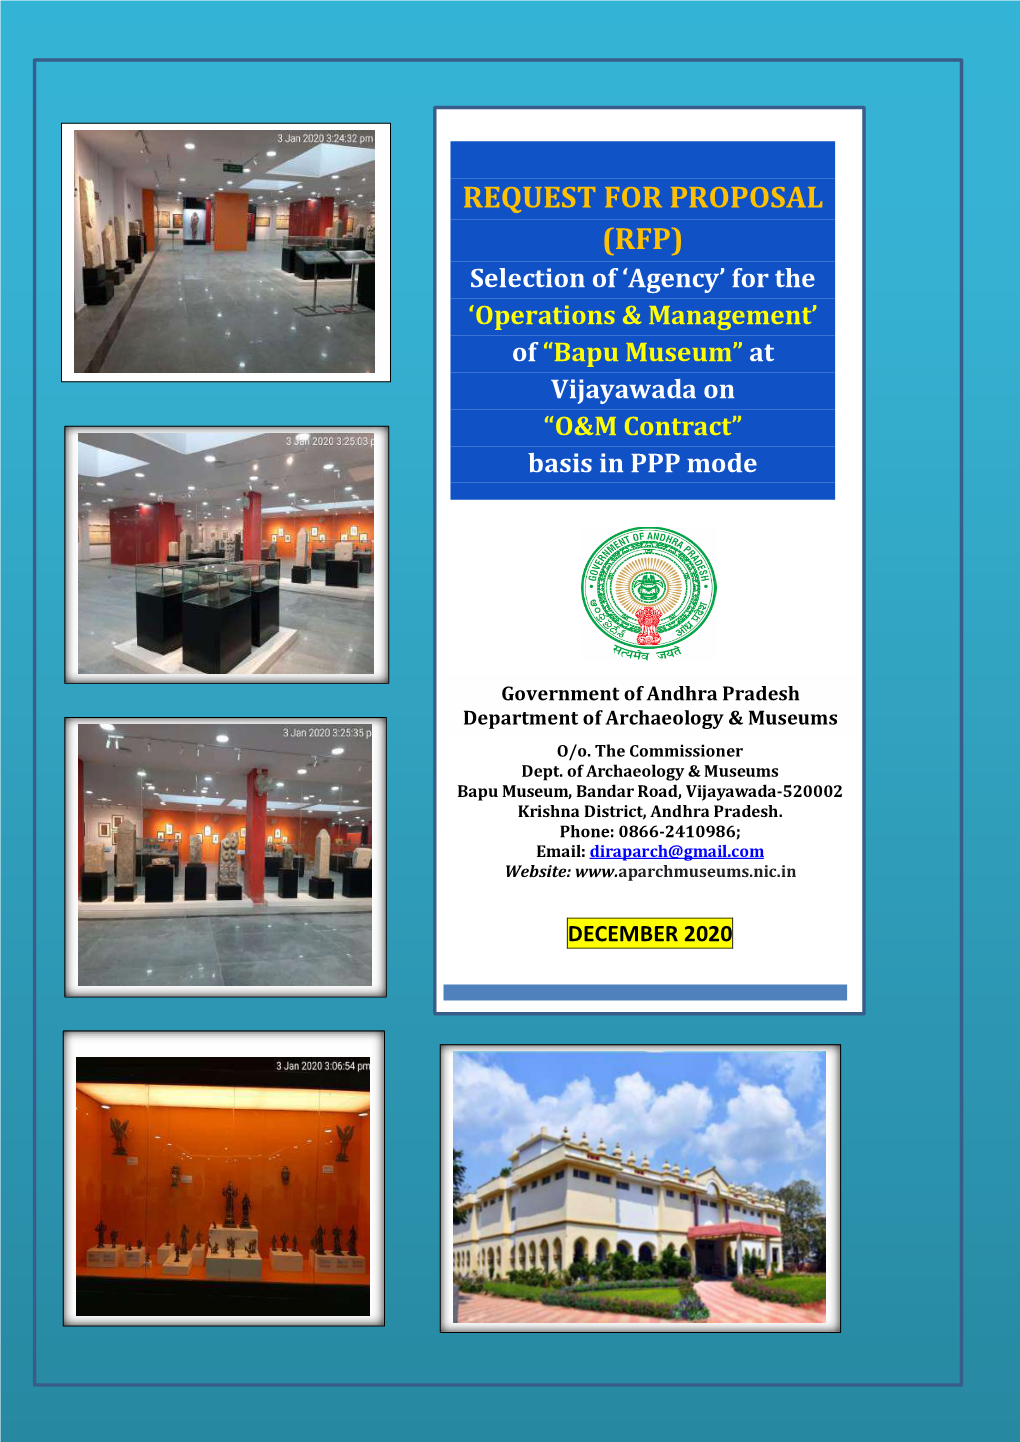 RFP) Selection of ‘Agency’ for the ‘Operations & Management’ of “Bapu Museum” At